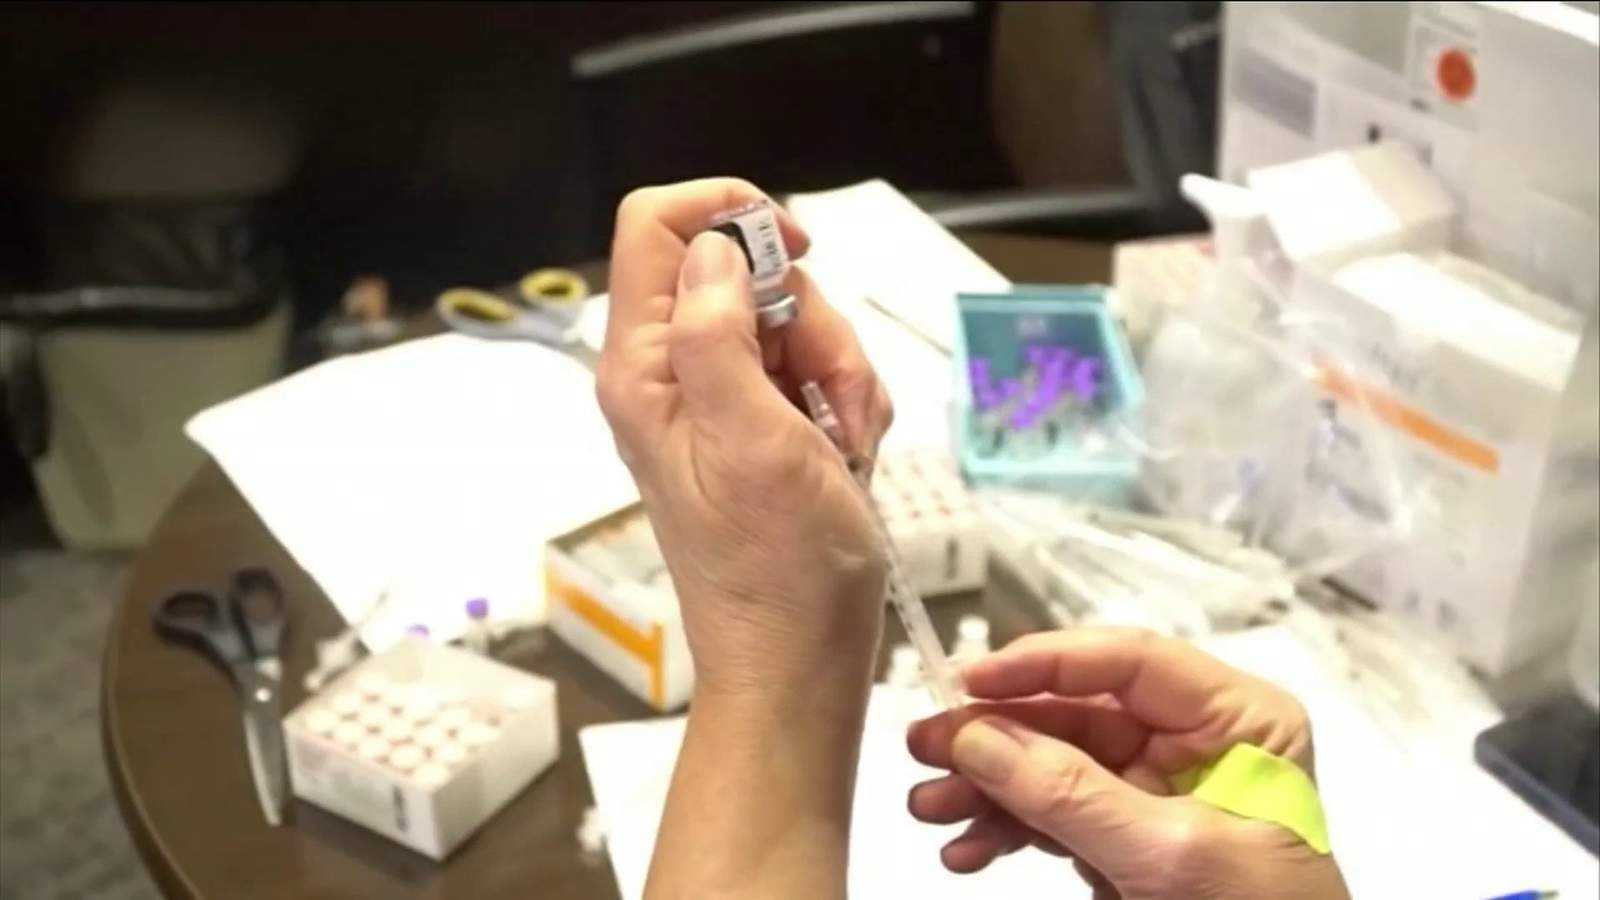 Health Department: At least 163 vaccine doses wasted or spoiled in Duval County